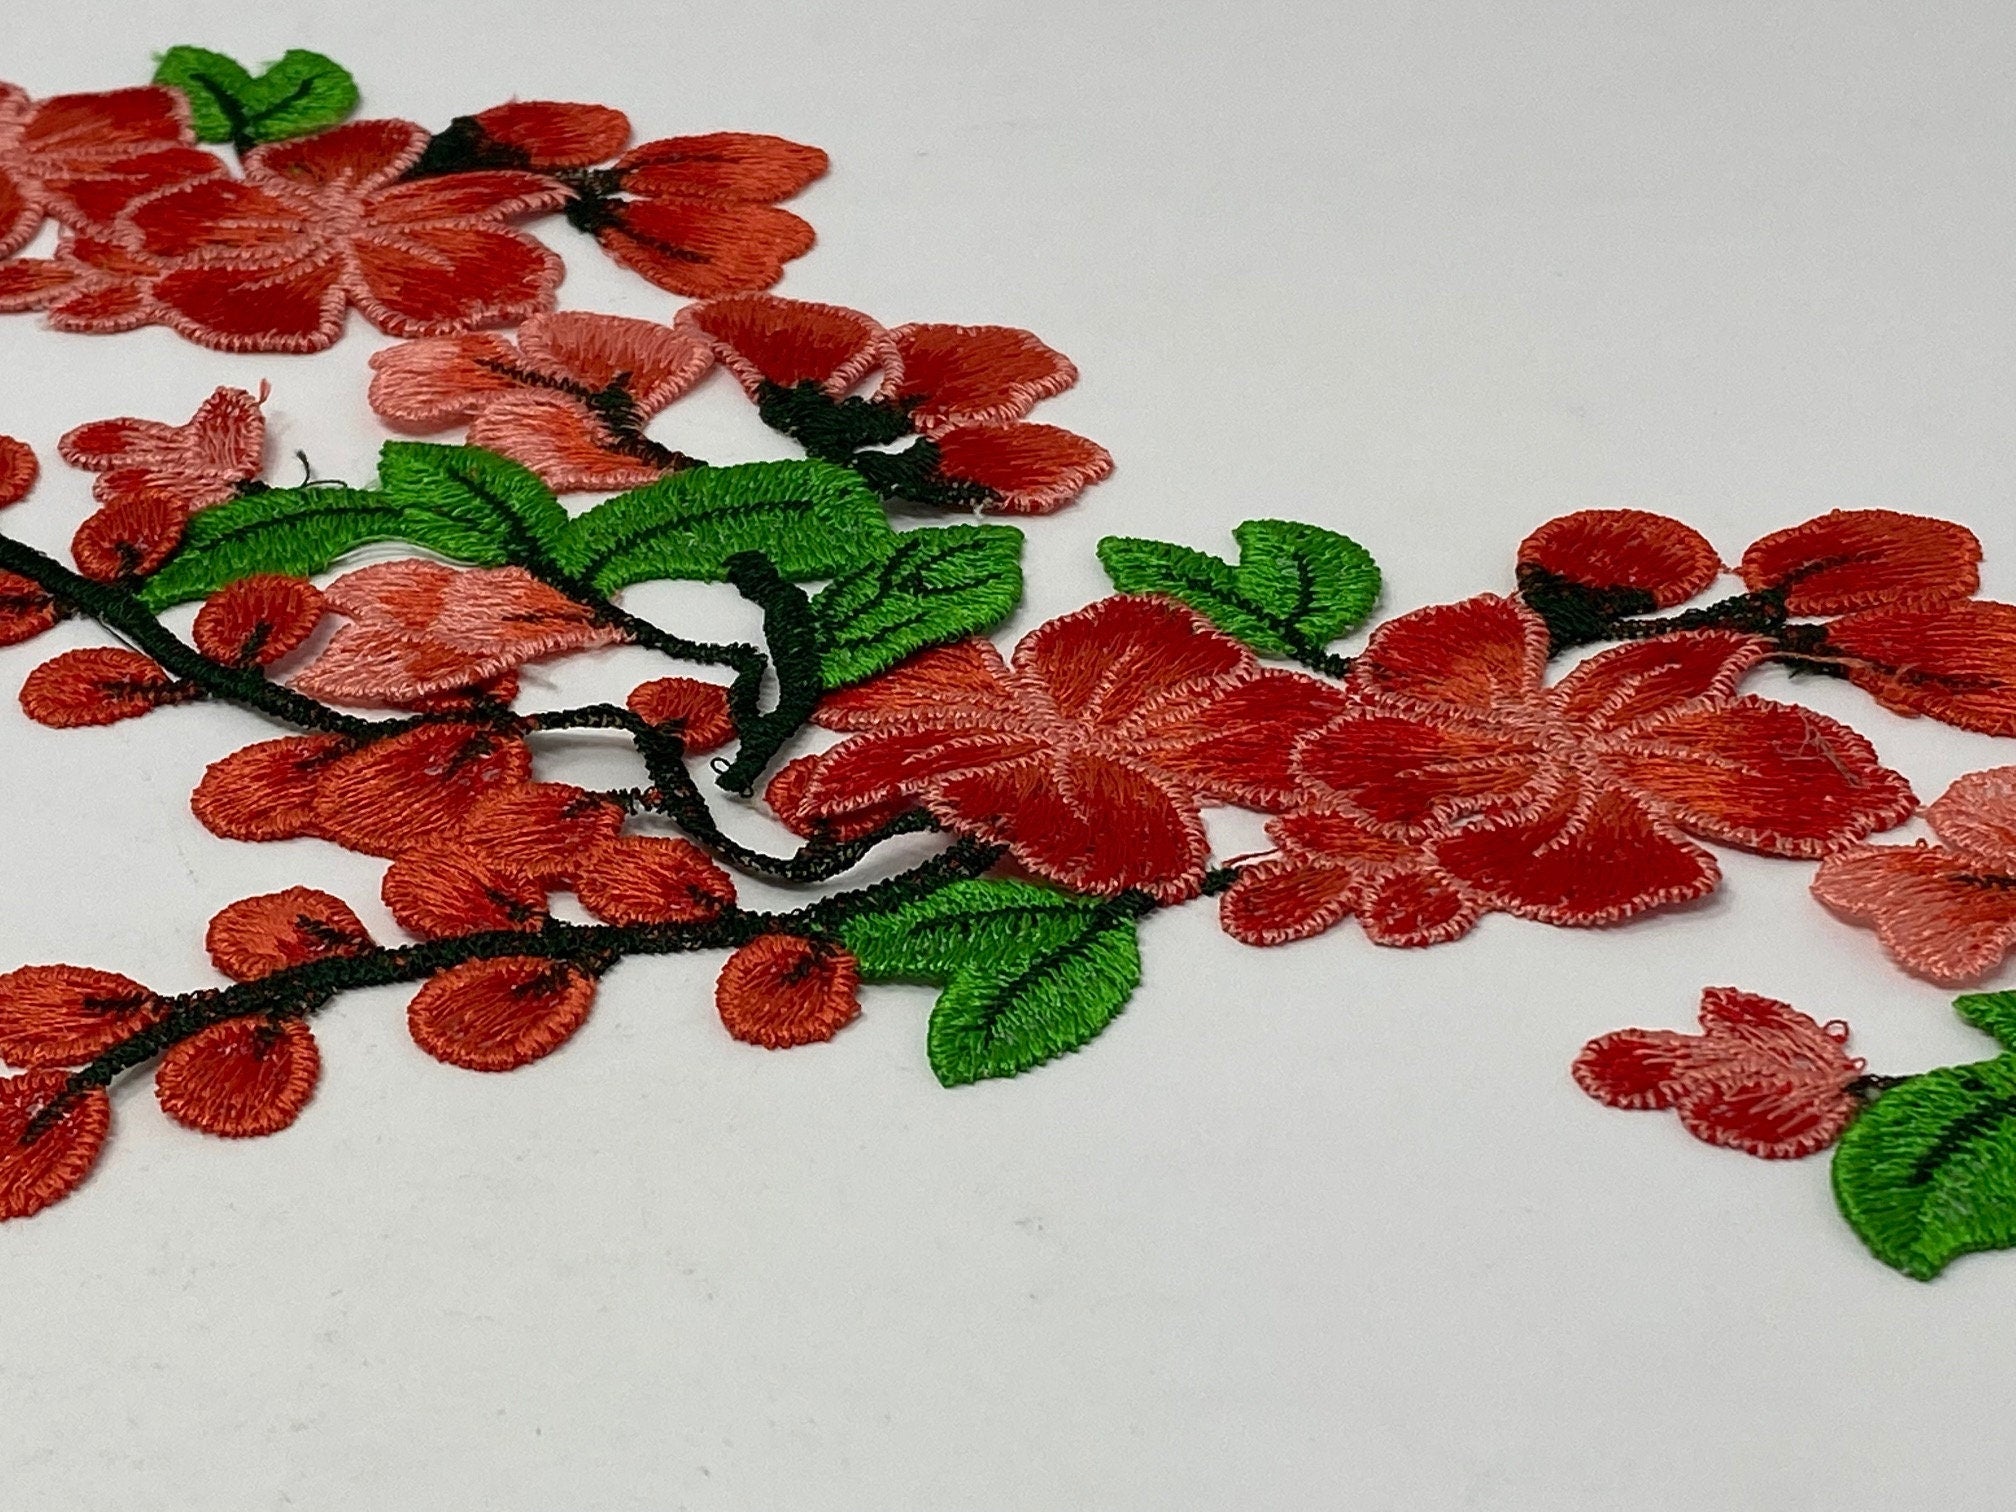 NEW, 2 Pc., Red Lace Flowers with Leaves and Stems, Sew-on Lace Flower Set, Great for Shoes, Denim,Jackets, Sweaters, Etc. Size 12 inches